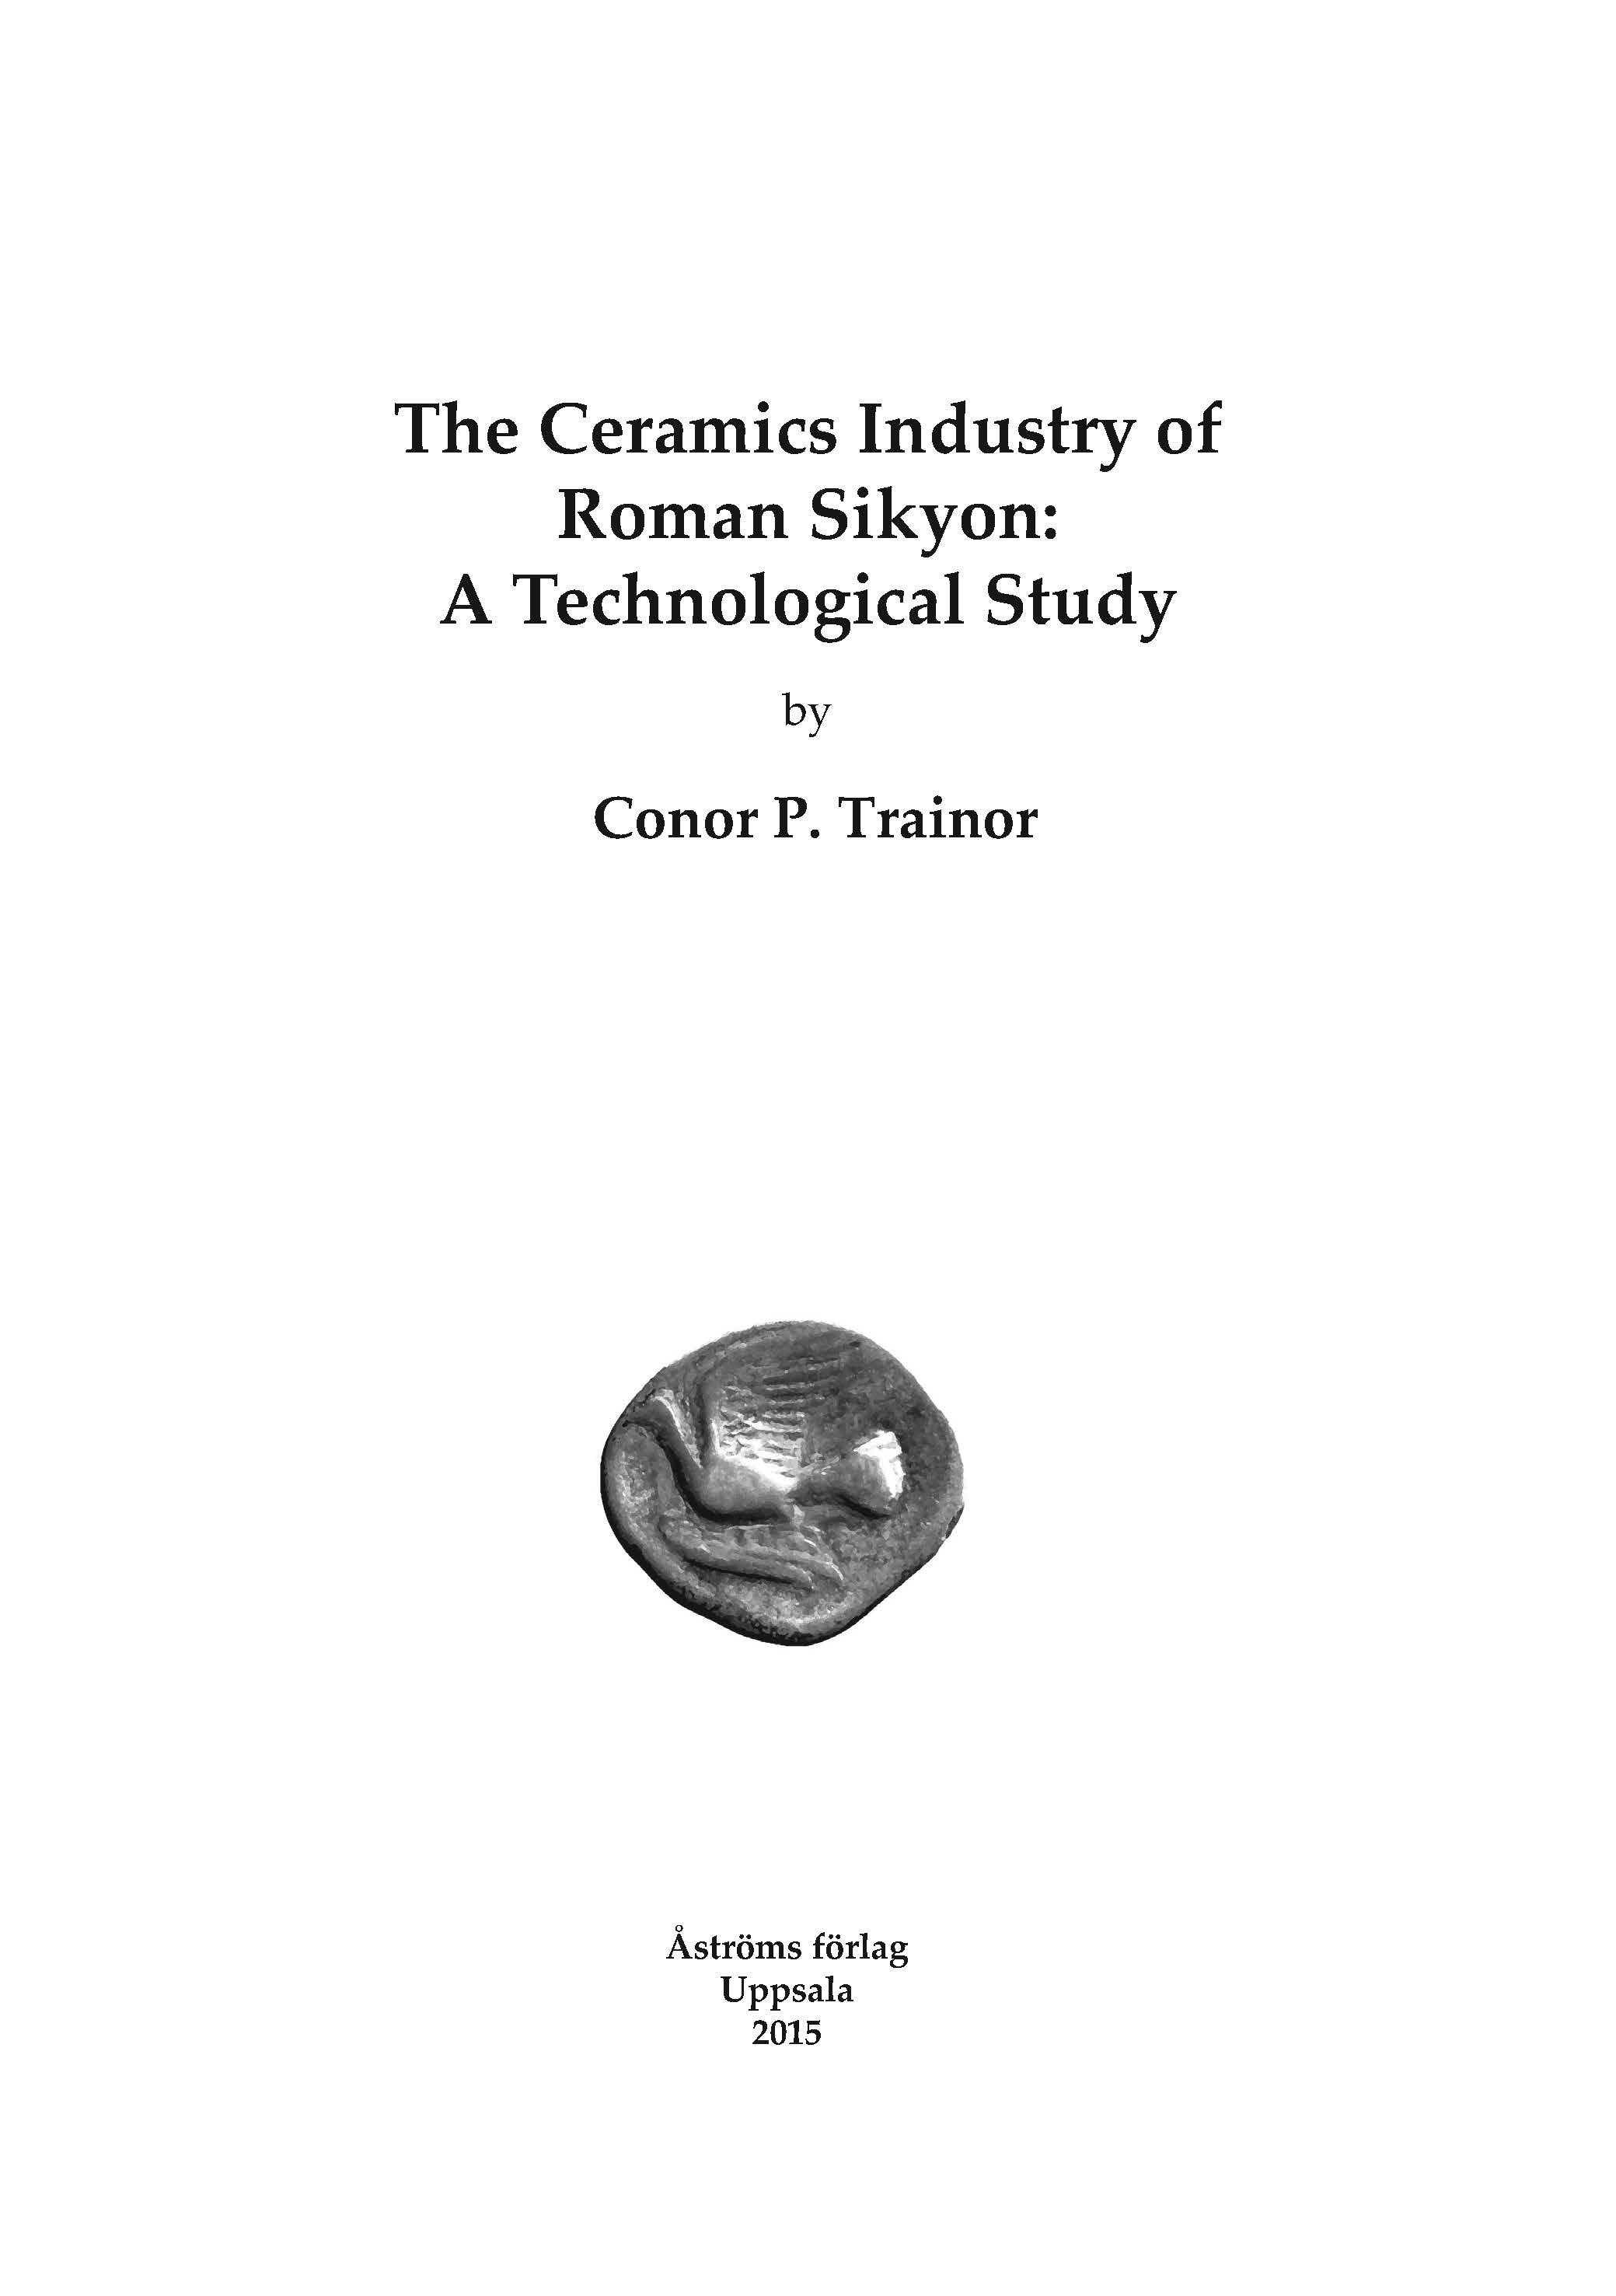 [The Ceramics Industry of Roman Sikyon: A Technological Study.]